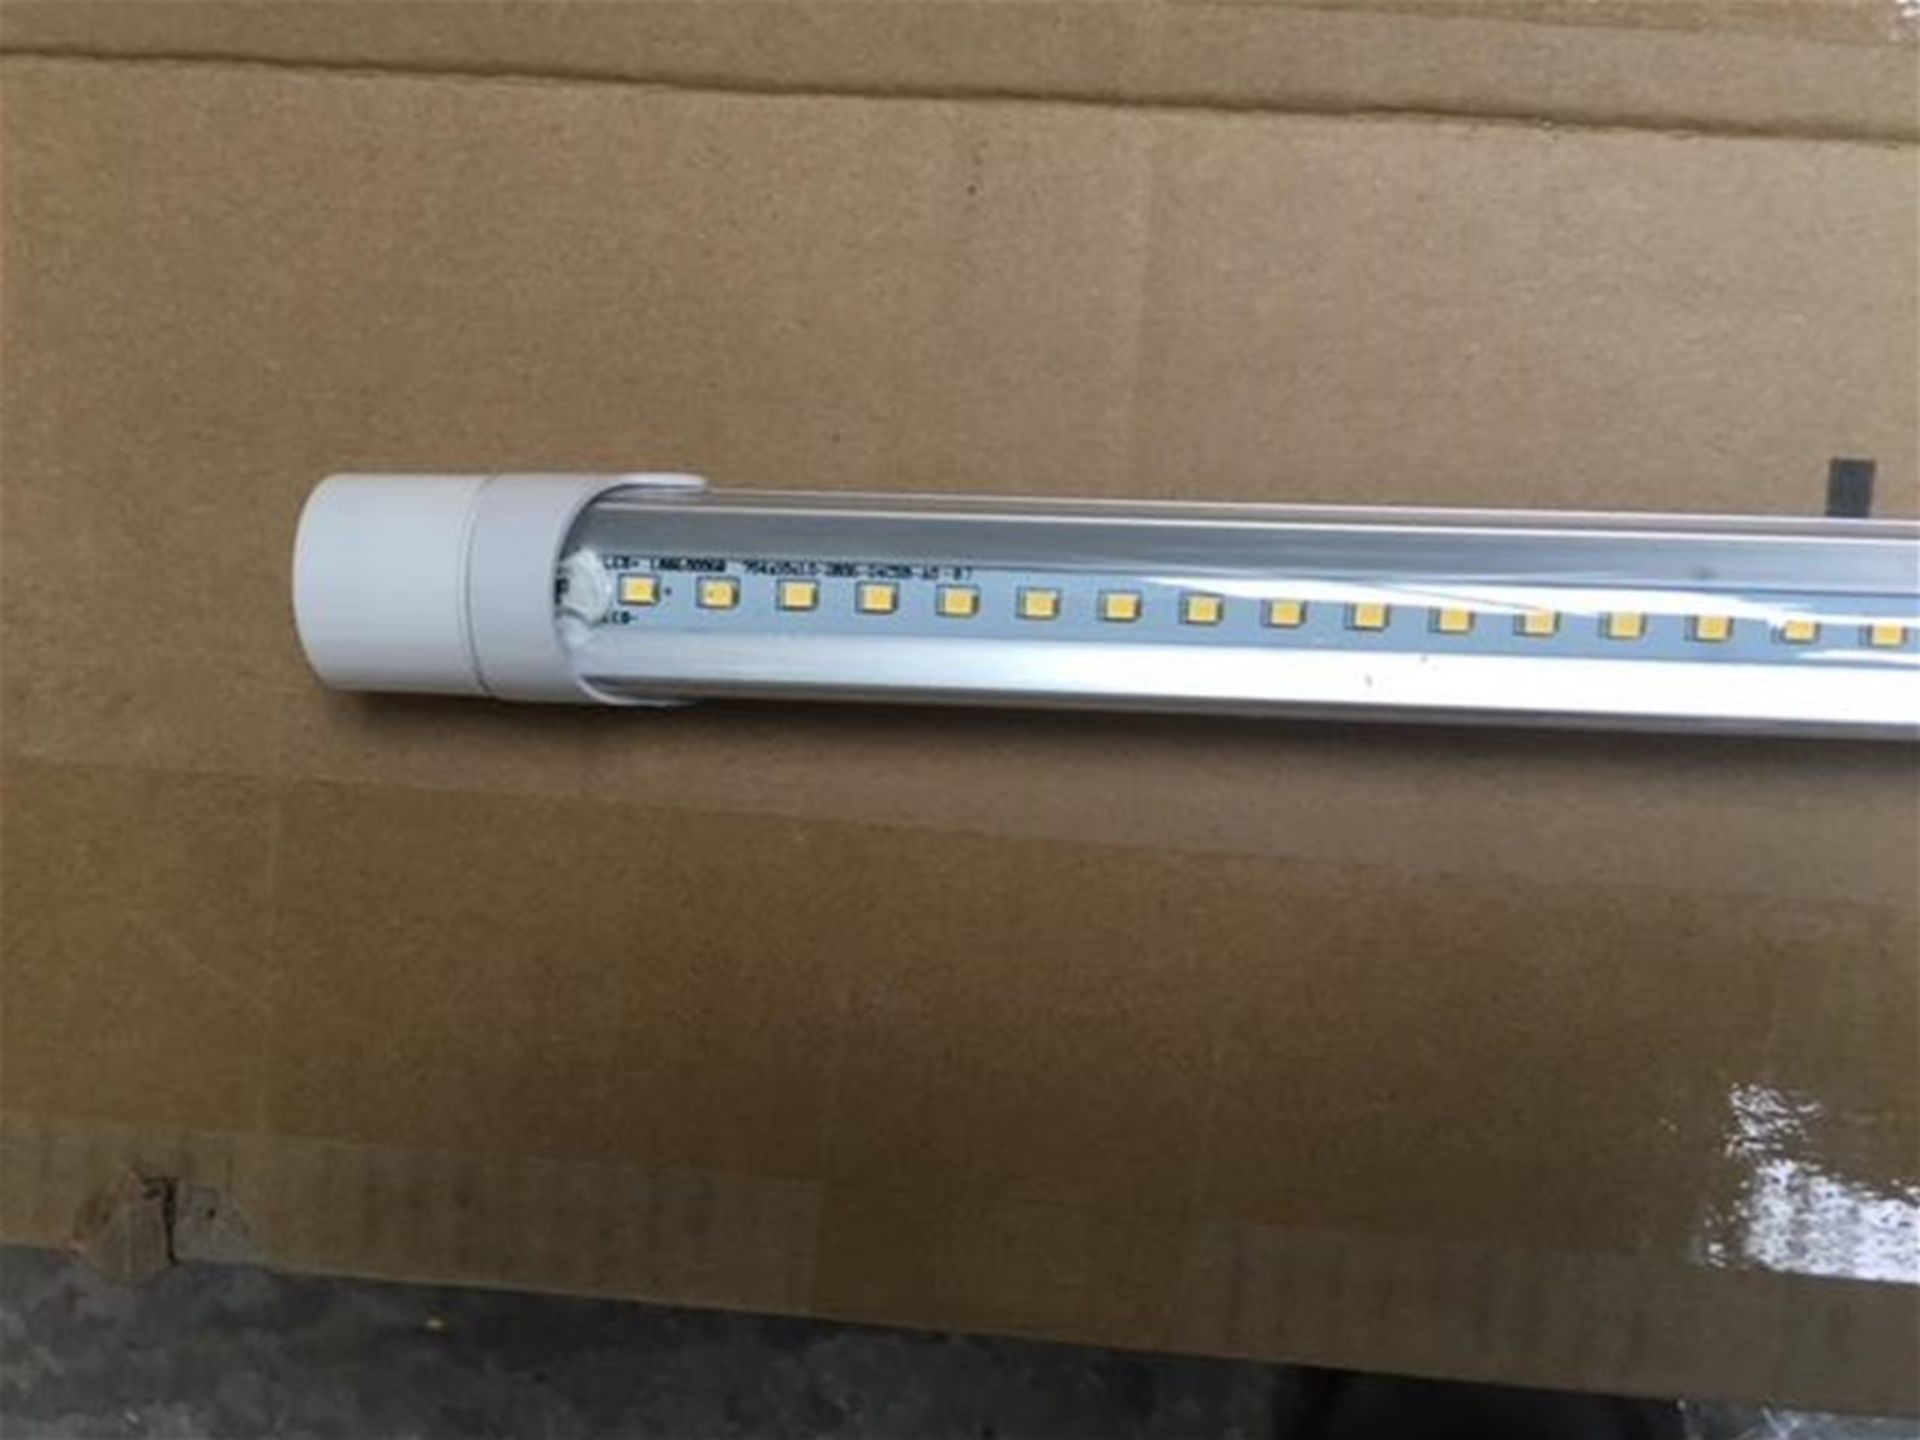 NEW 200x Led Tube Lights New Boxed With Built In Driver - Image 5 of 7